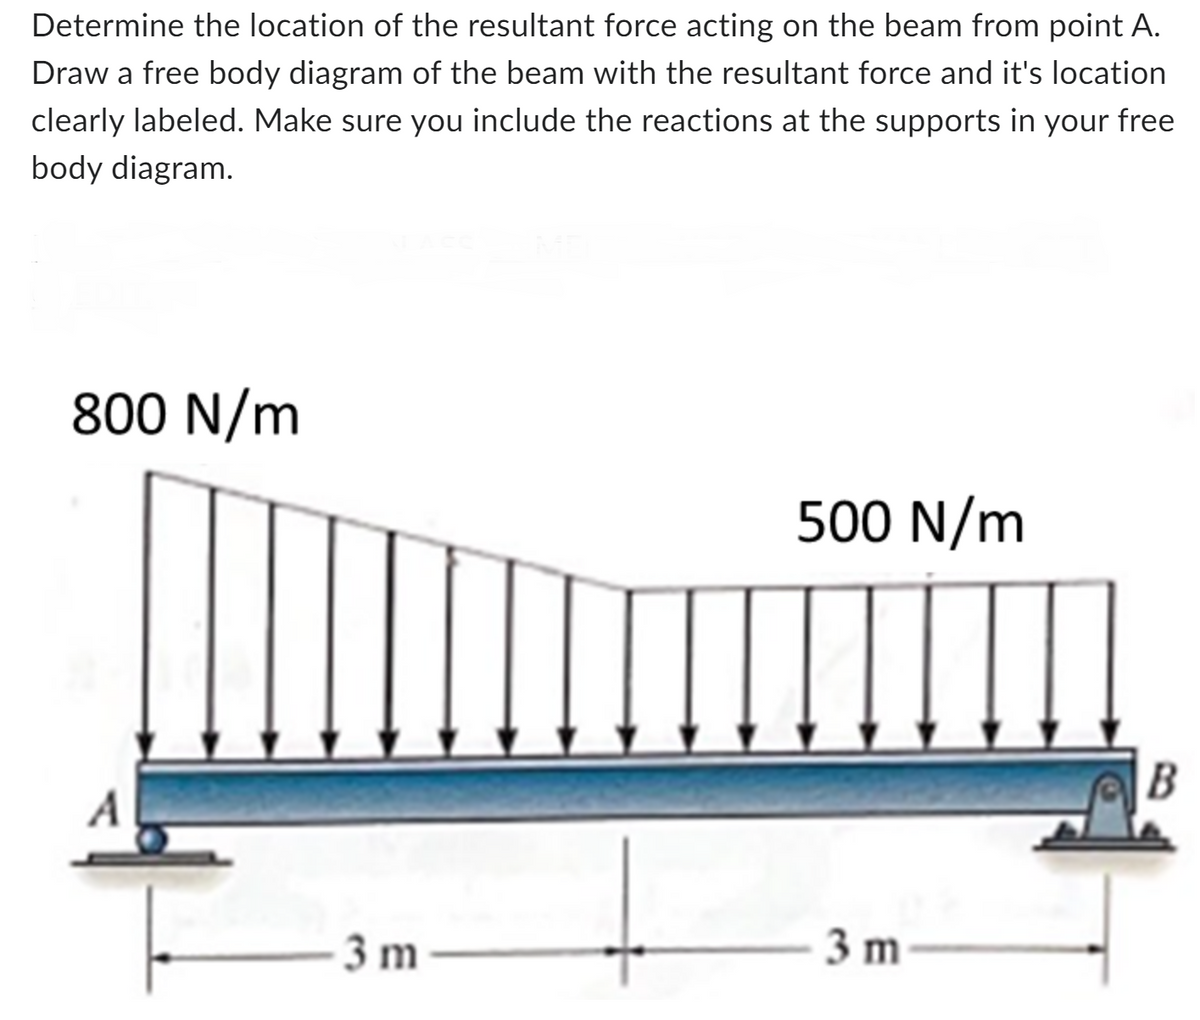 Determine the location of the resultant force acting on the beam from point A.
Draw a free body diagram of the beam with the resultant force and it's location
clearly labeled. Make sure you include the reactions at the supports in your free
body diagram.
800 N/m
-3 m
500 N/m
3 m
B